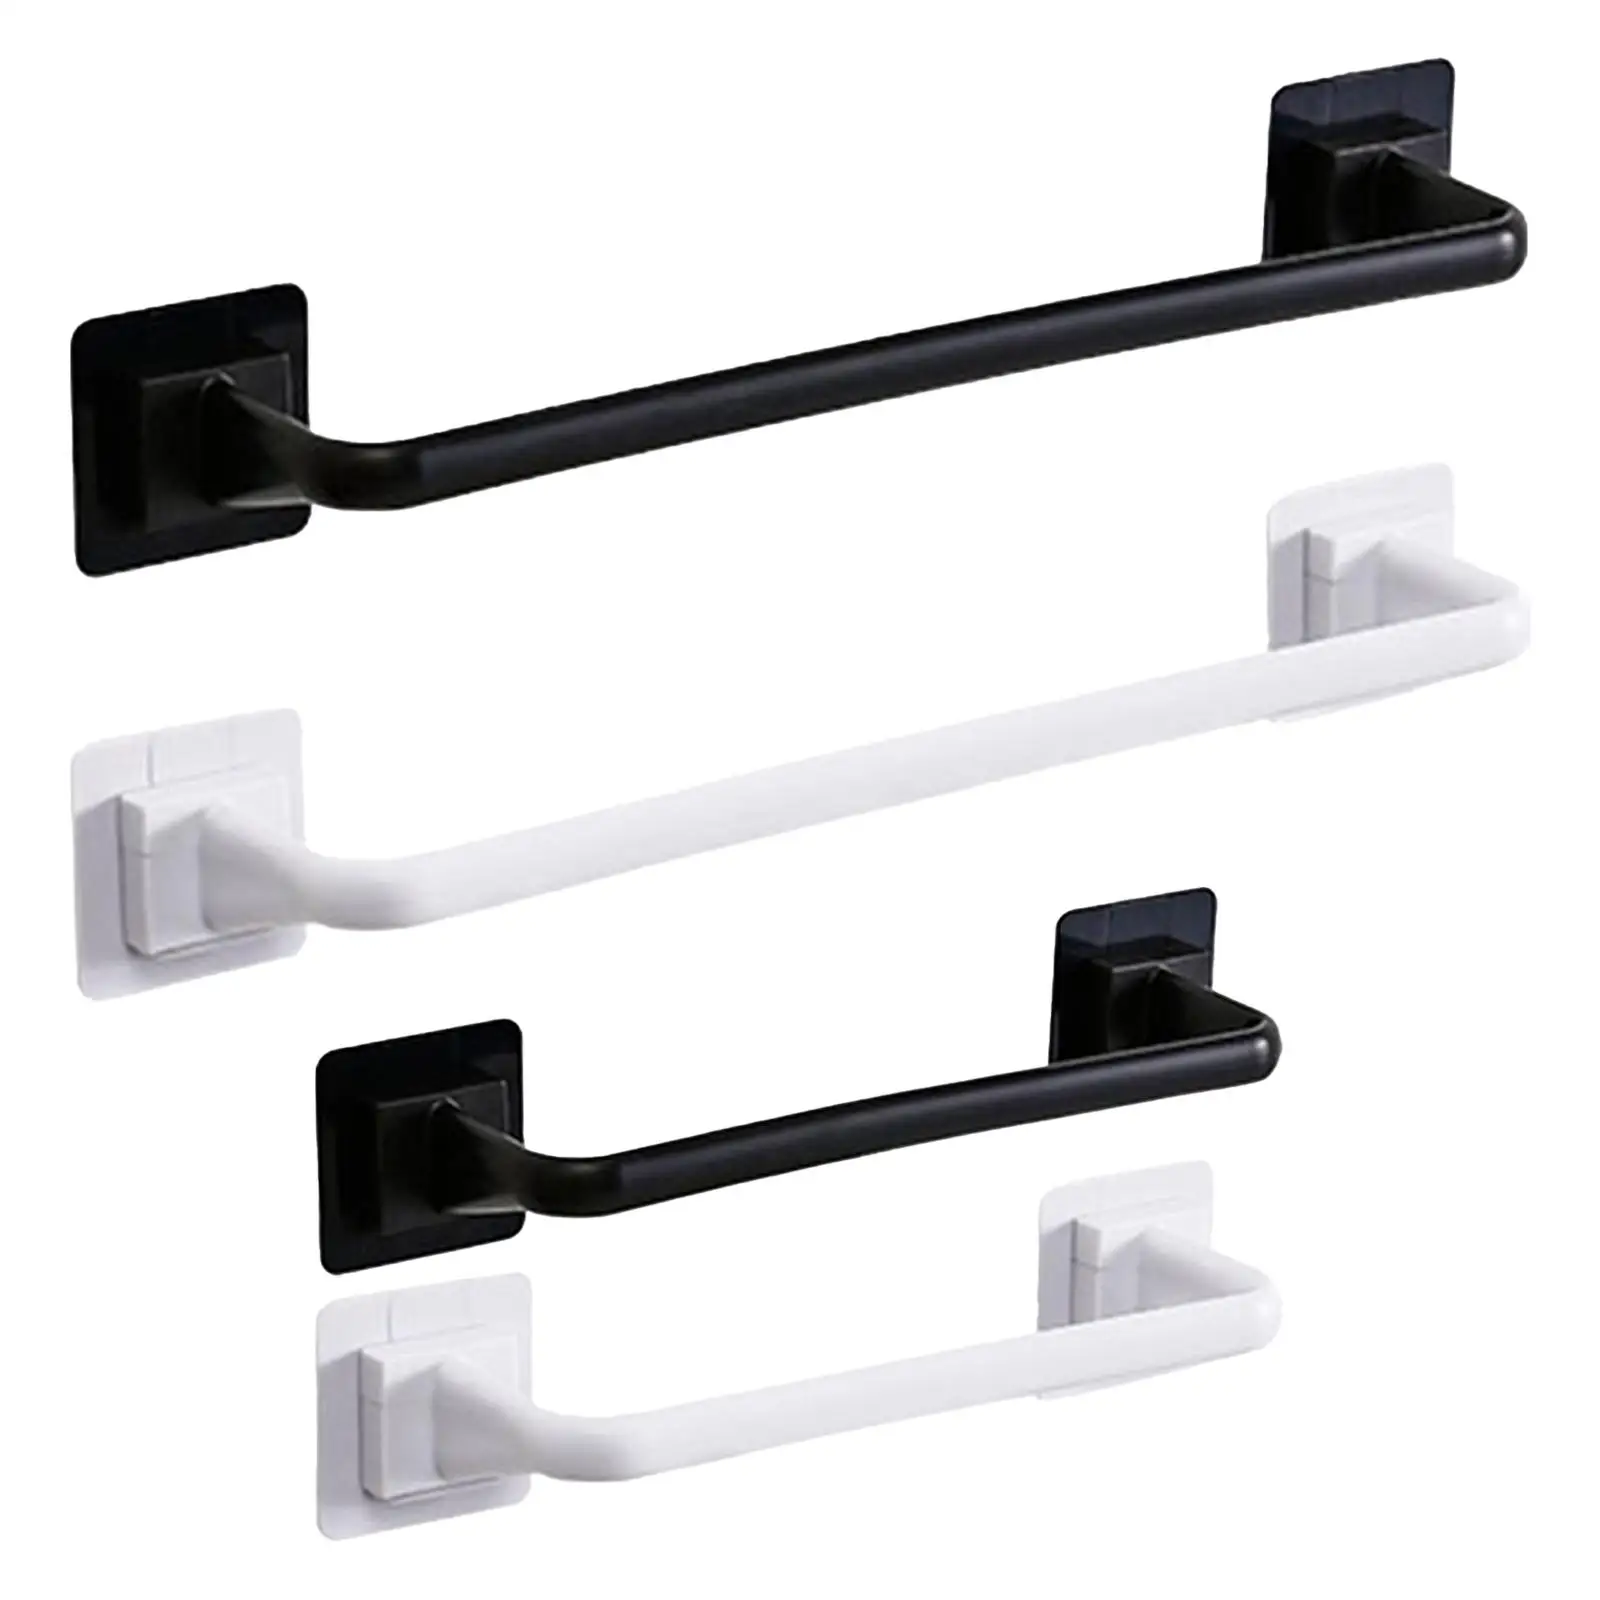 Durable Over Cabinet Towel Bar Strong Carrying Capacity Waterproof Easy to Clean Shelf Towel Hanger Wall Mounted for Kitchen